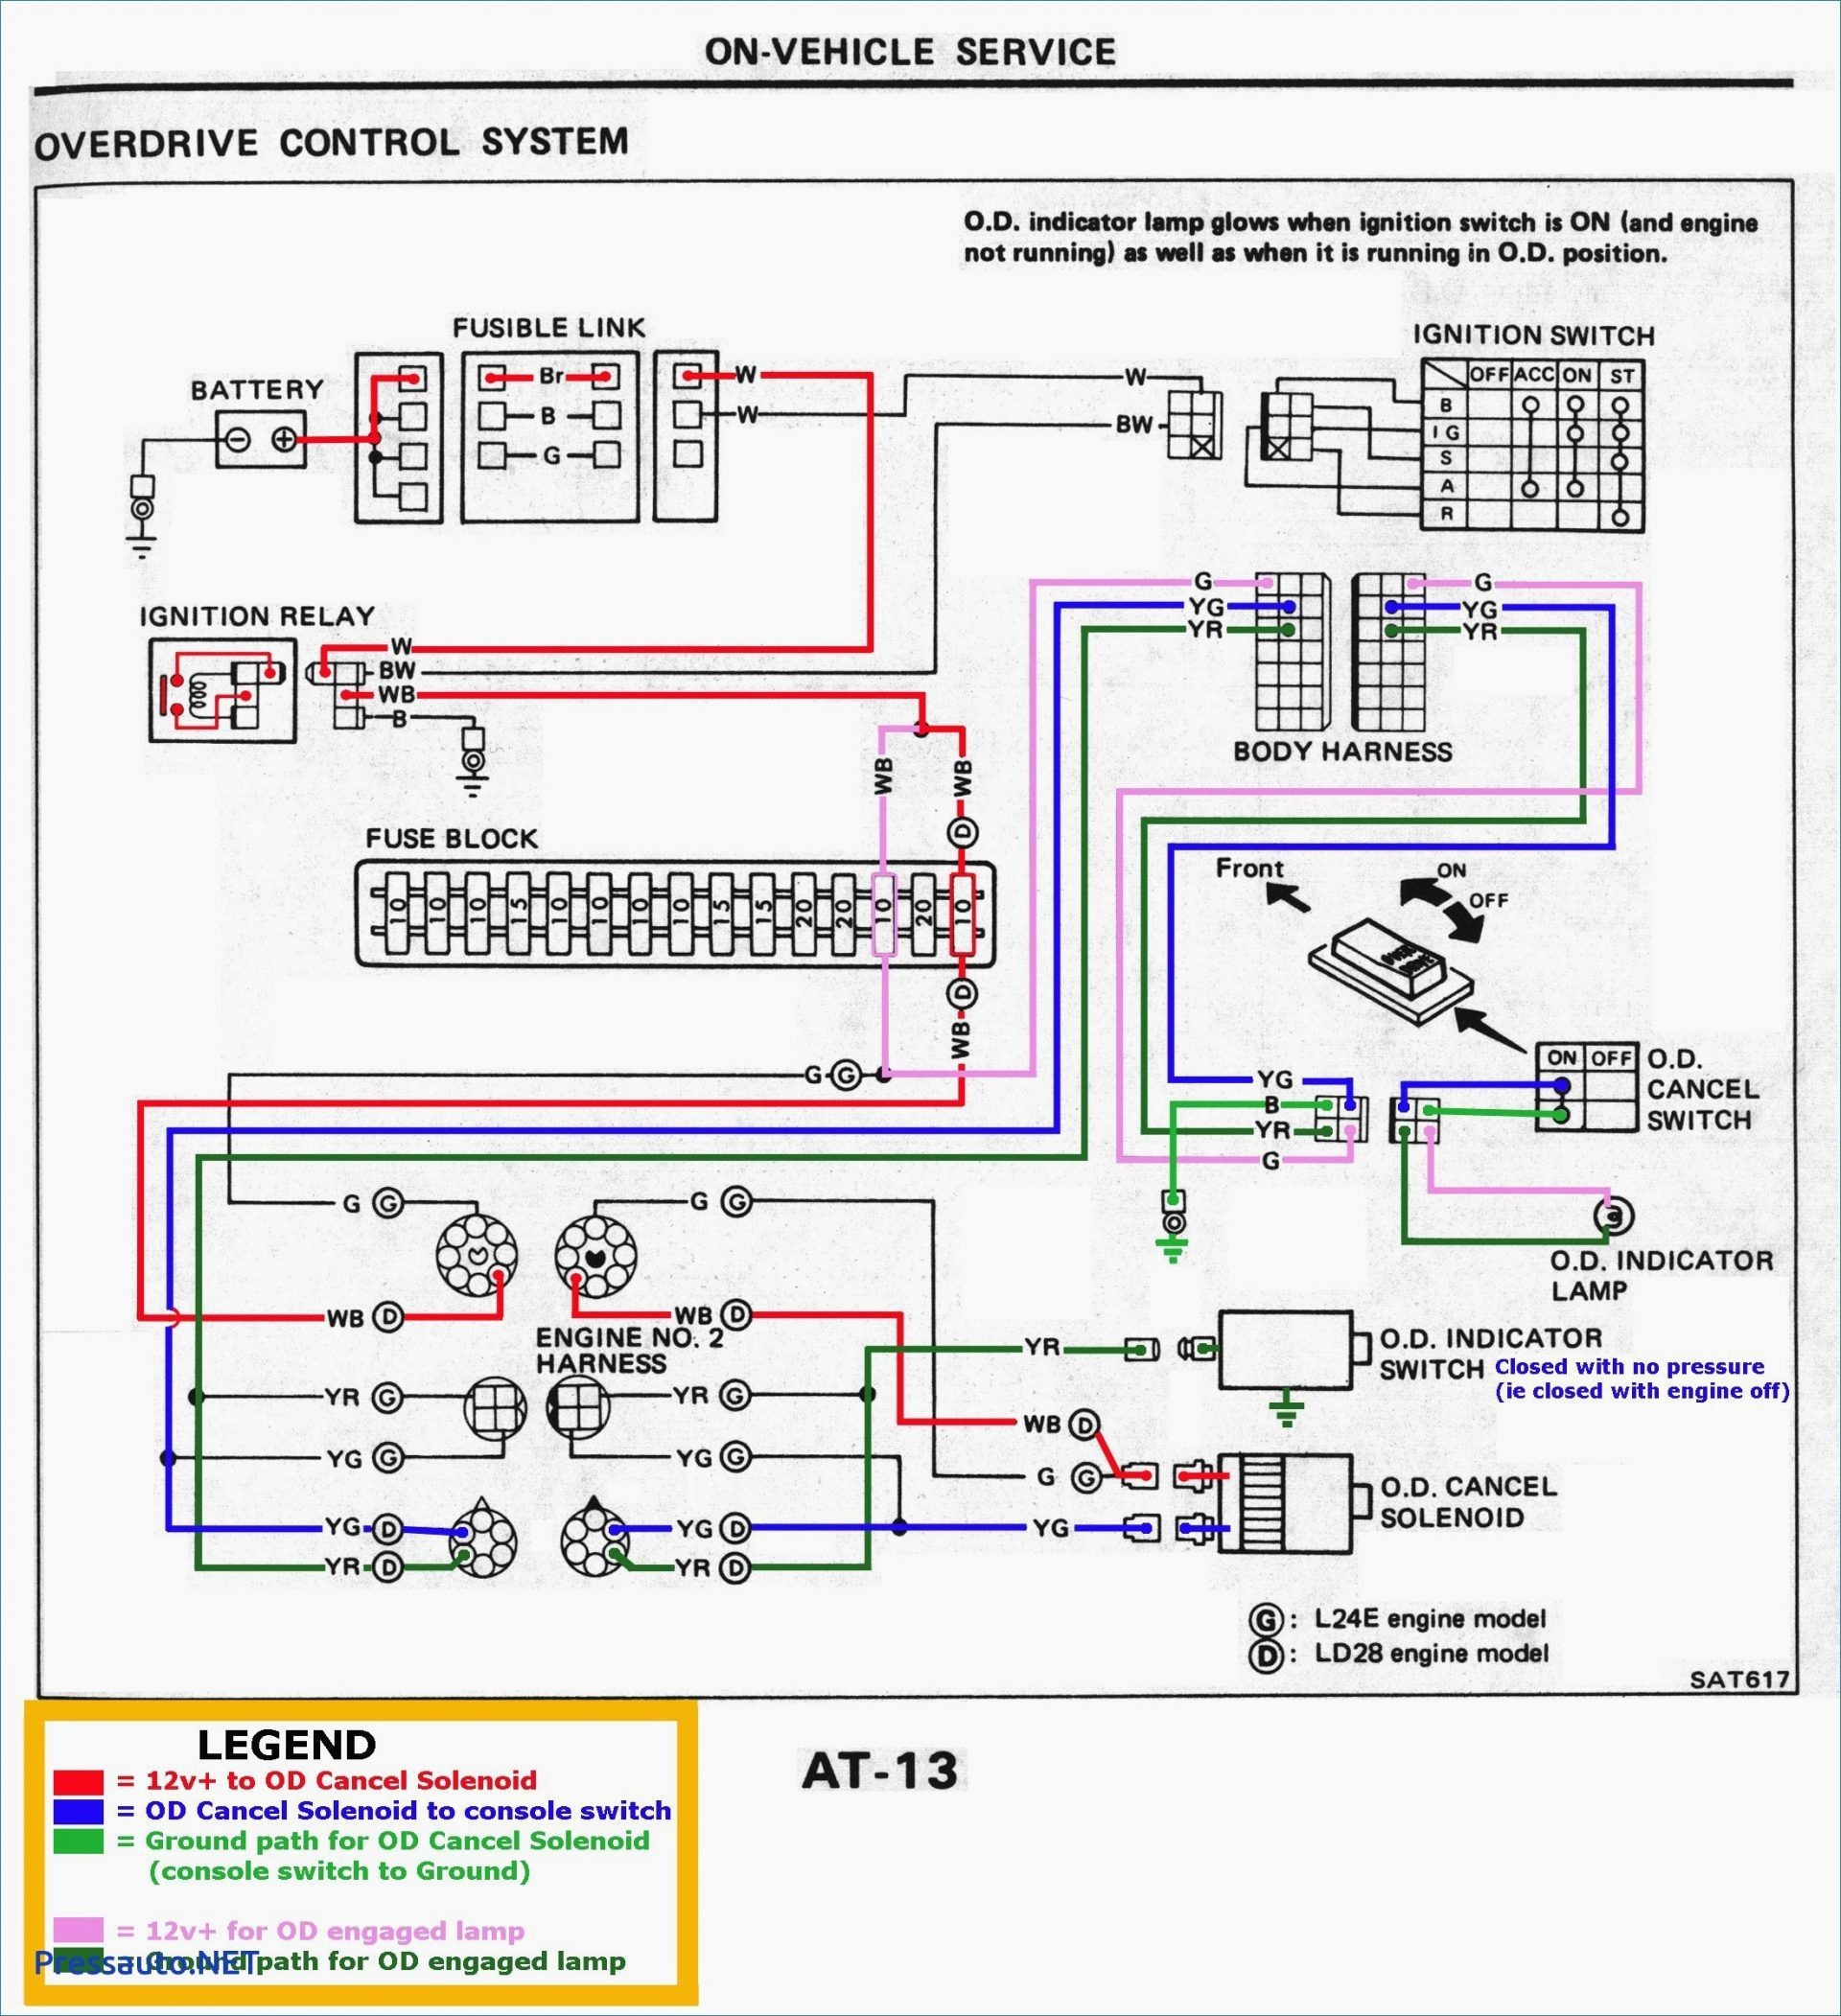 Wiring Diagram for Trailer Tail Lights New Trailer Light Harness Diagram Luxury Tail Light Wiring Diagram